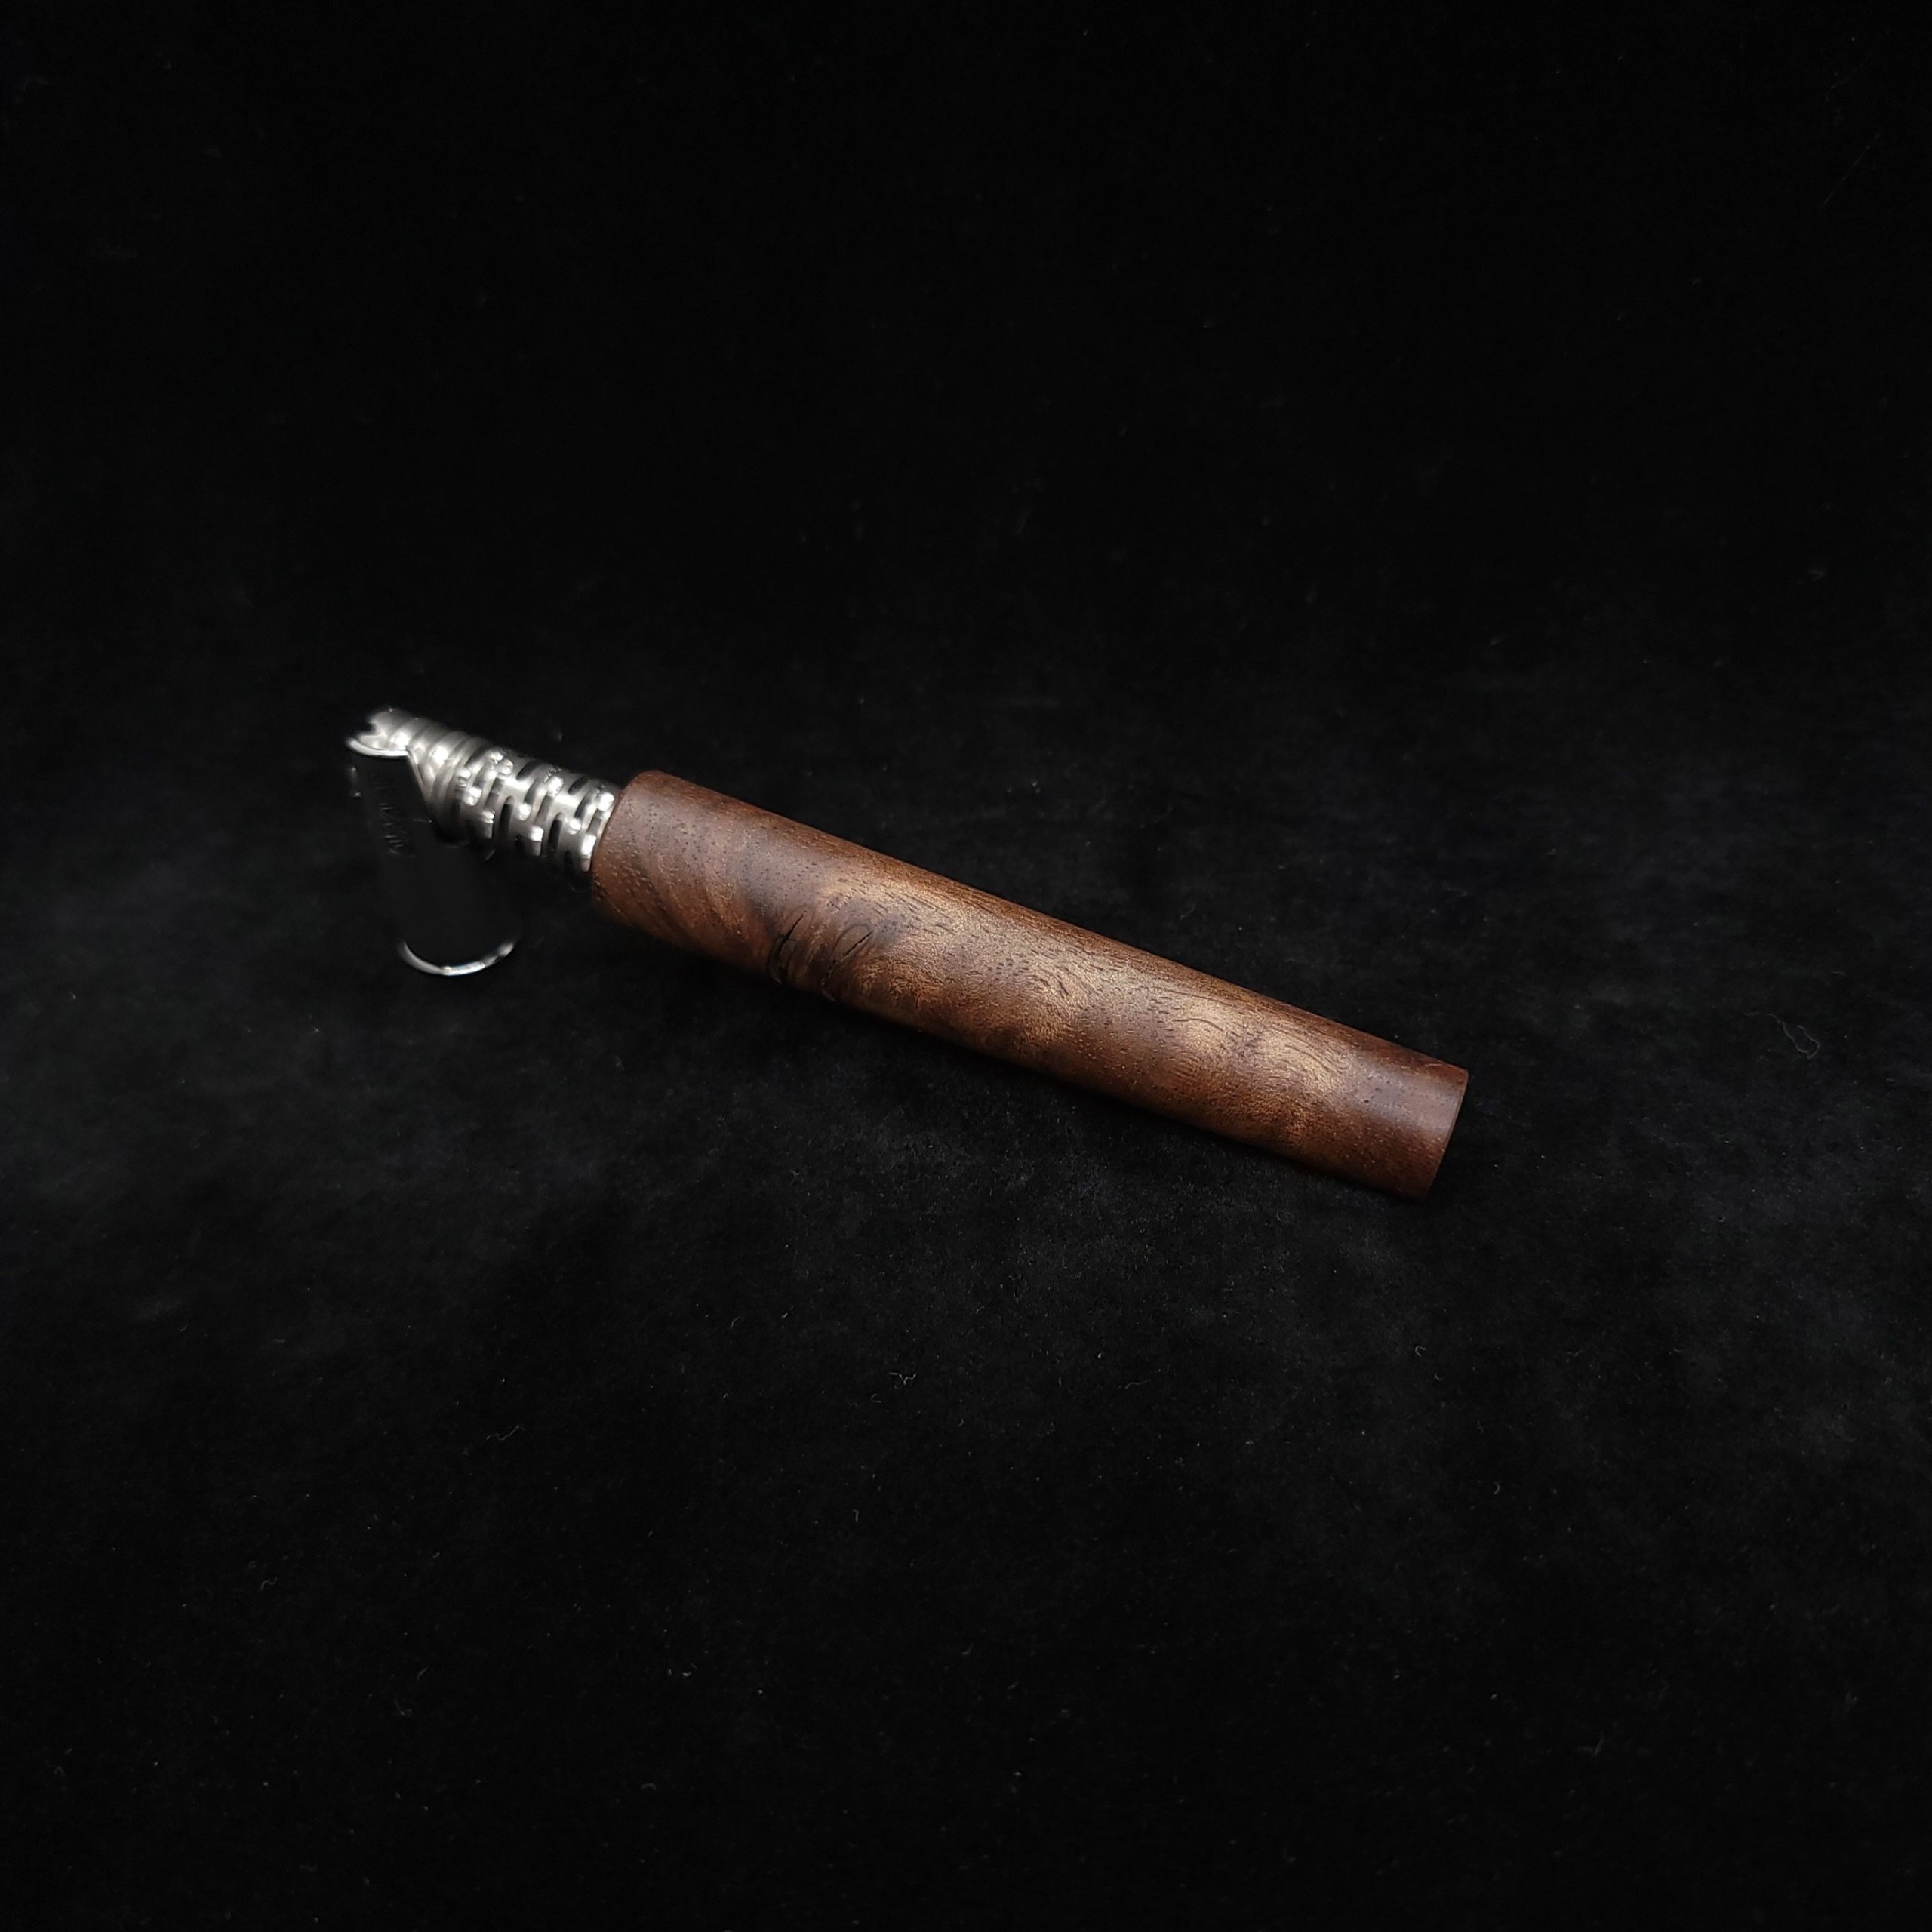 This image portrays The Blunt XL Dynavap Stem/Walnut Burl Wood by Dovetail Woodwork.